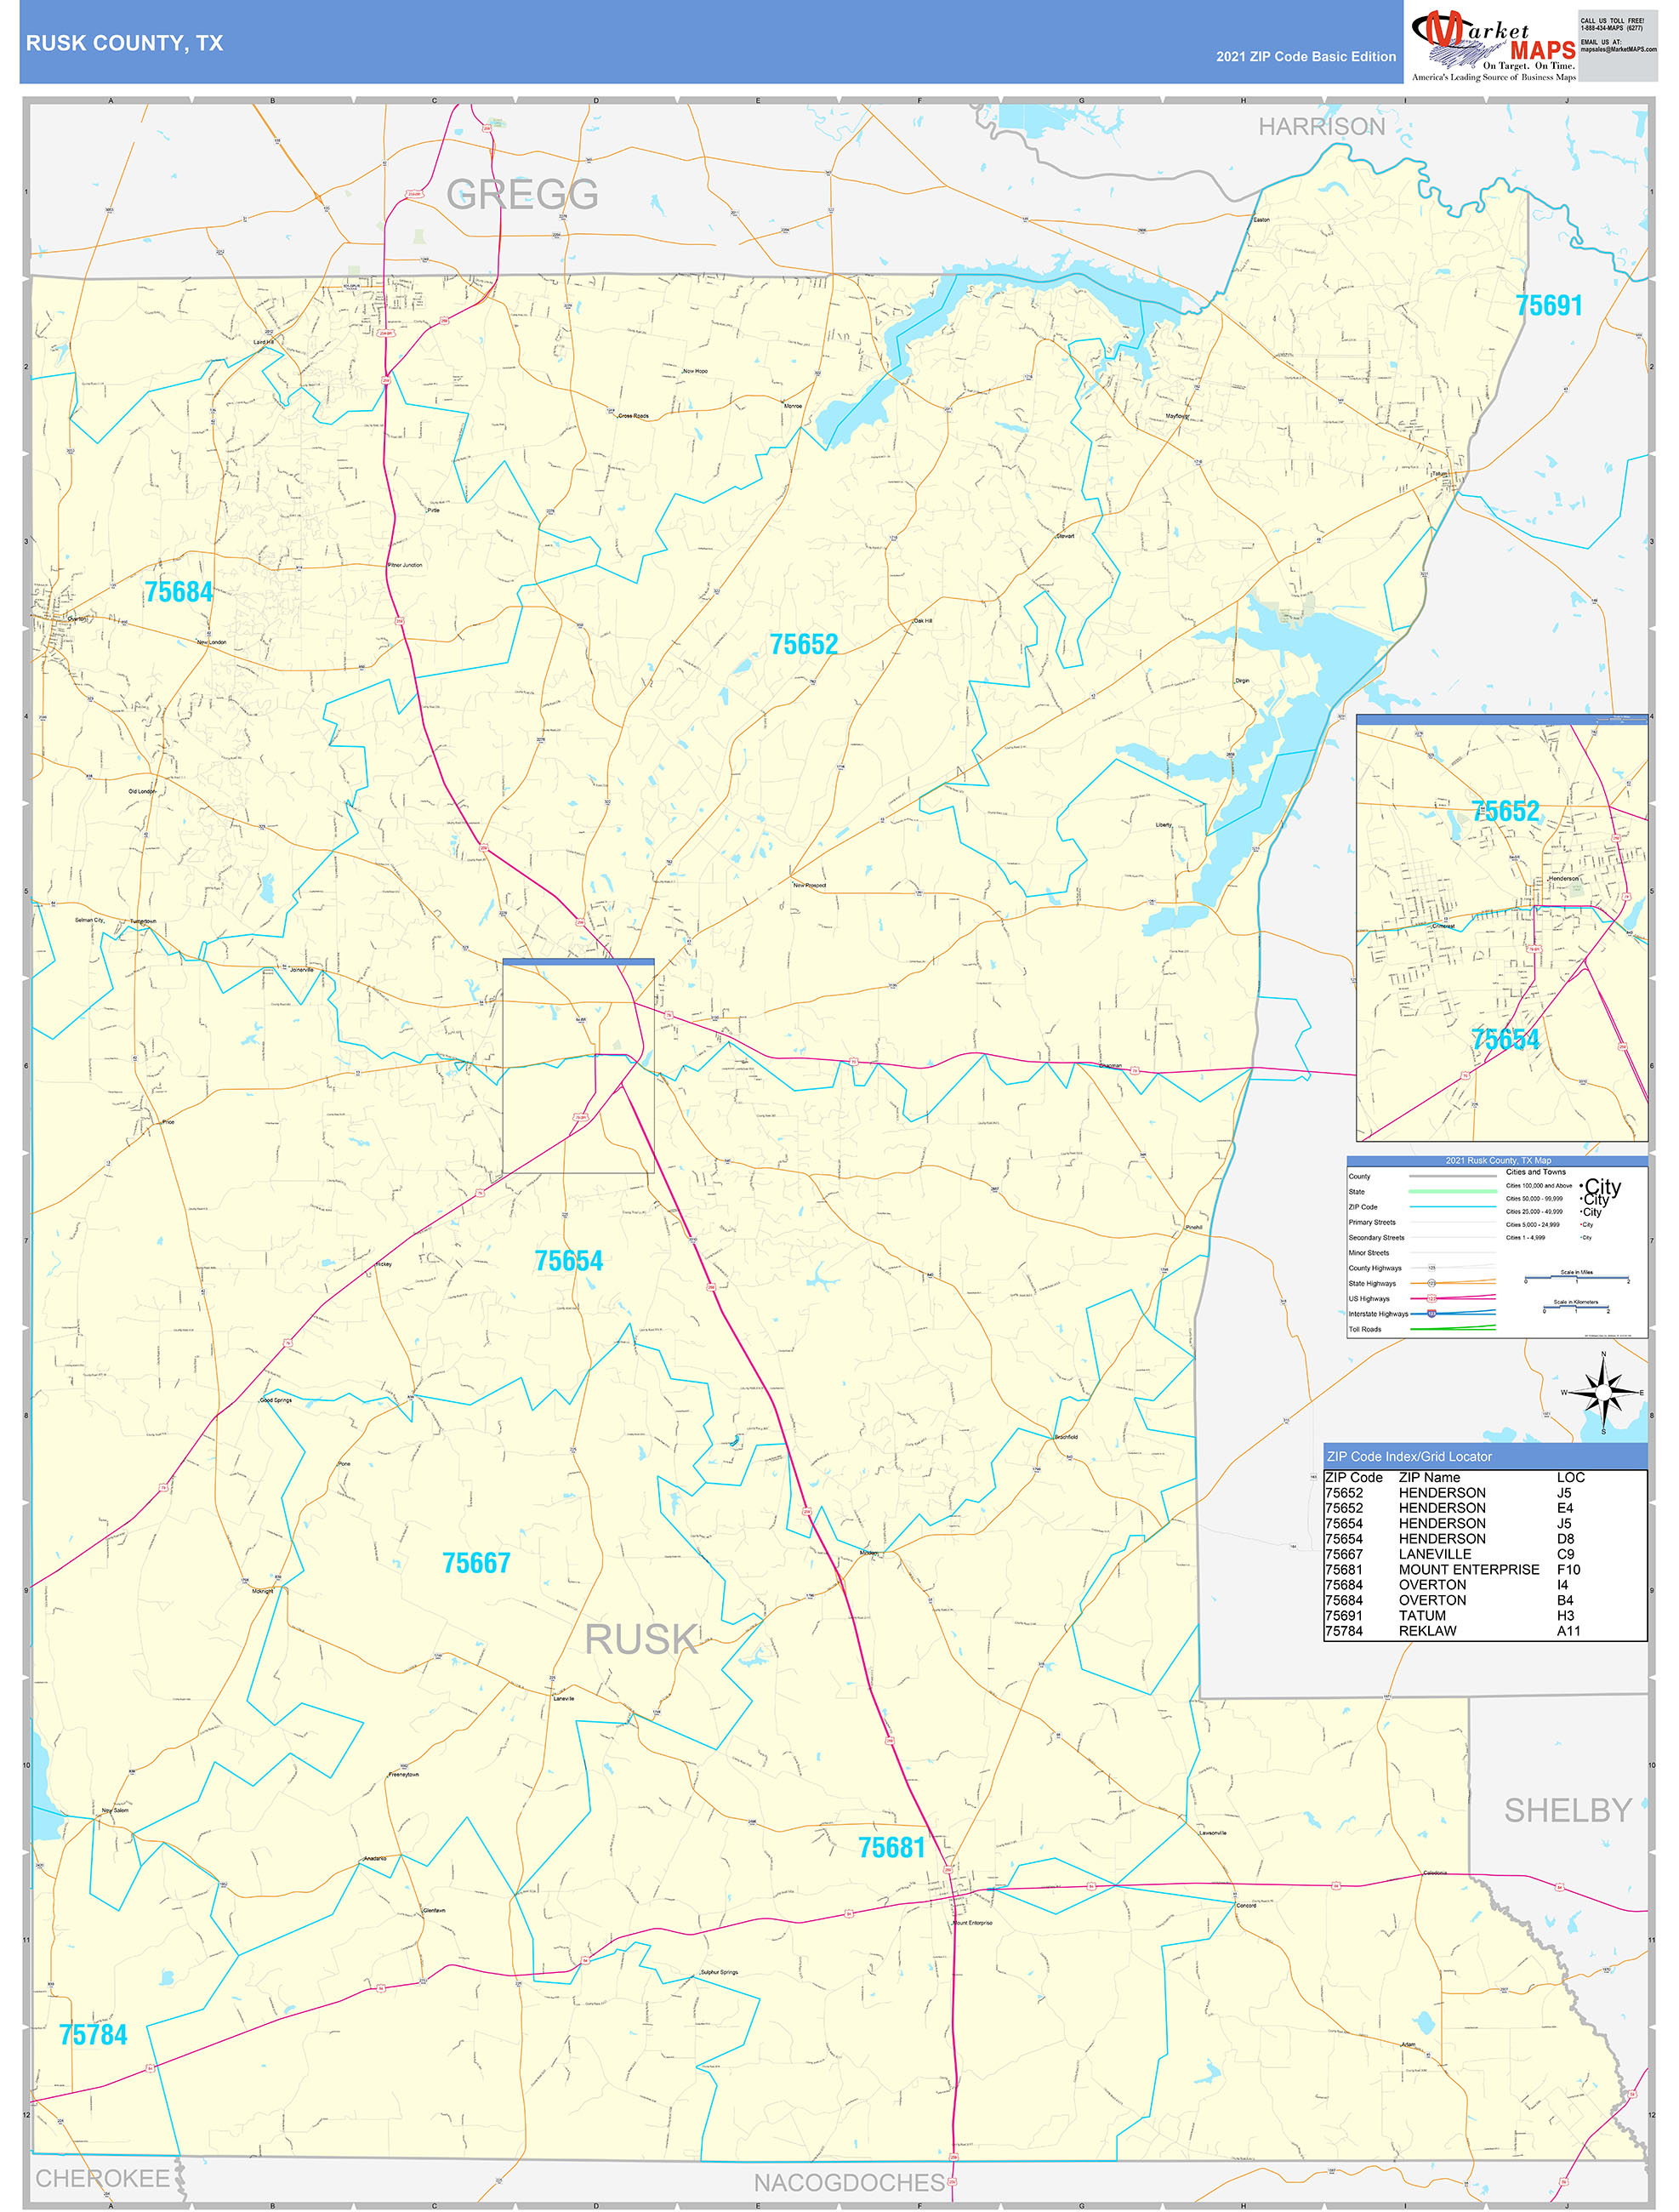 Rusk County, TX Zip Code Wall Map Basic Style by MarketMAPS - MapSales